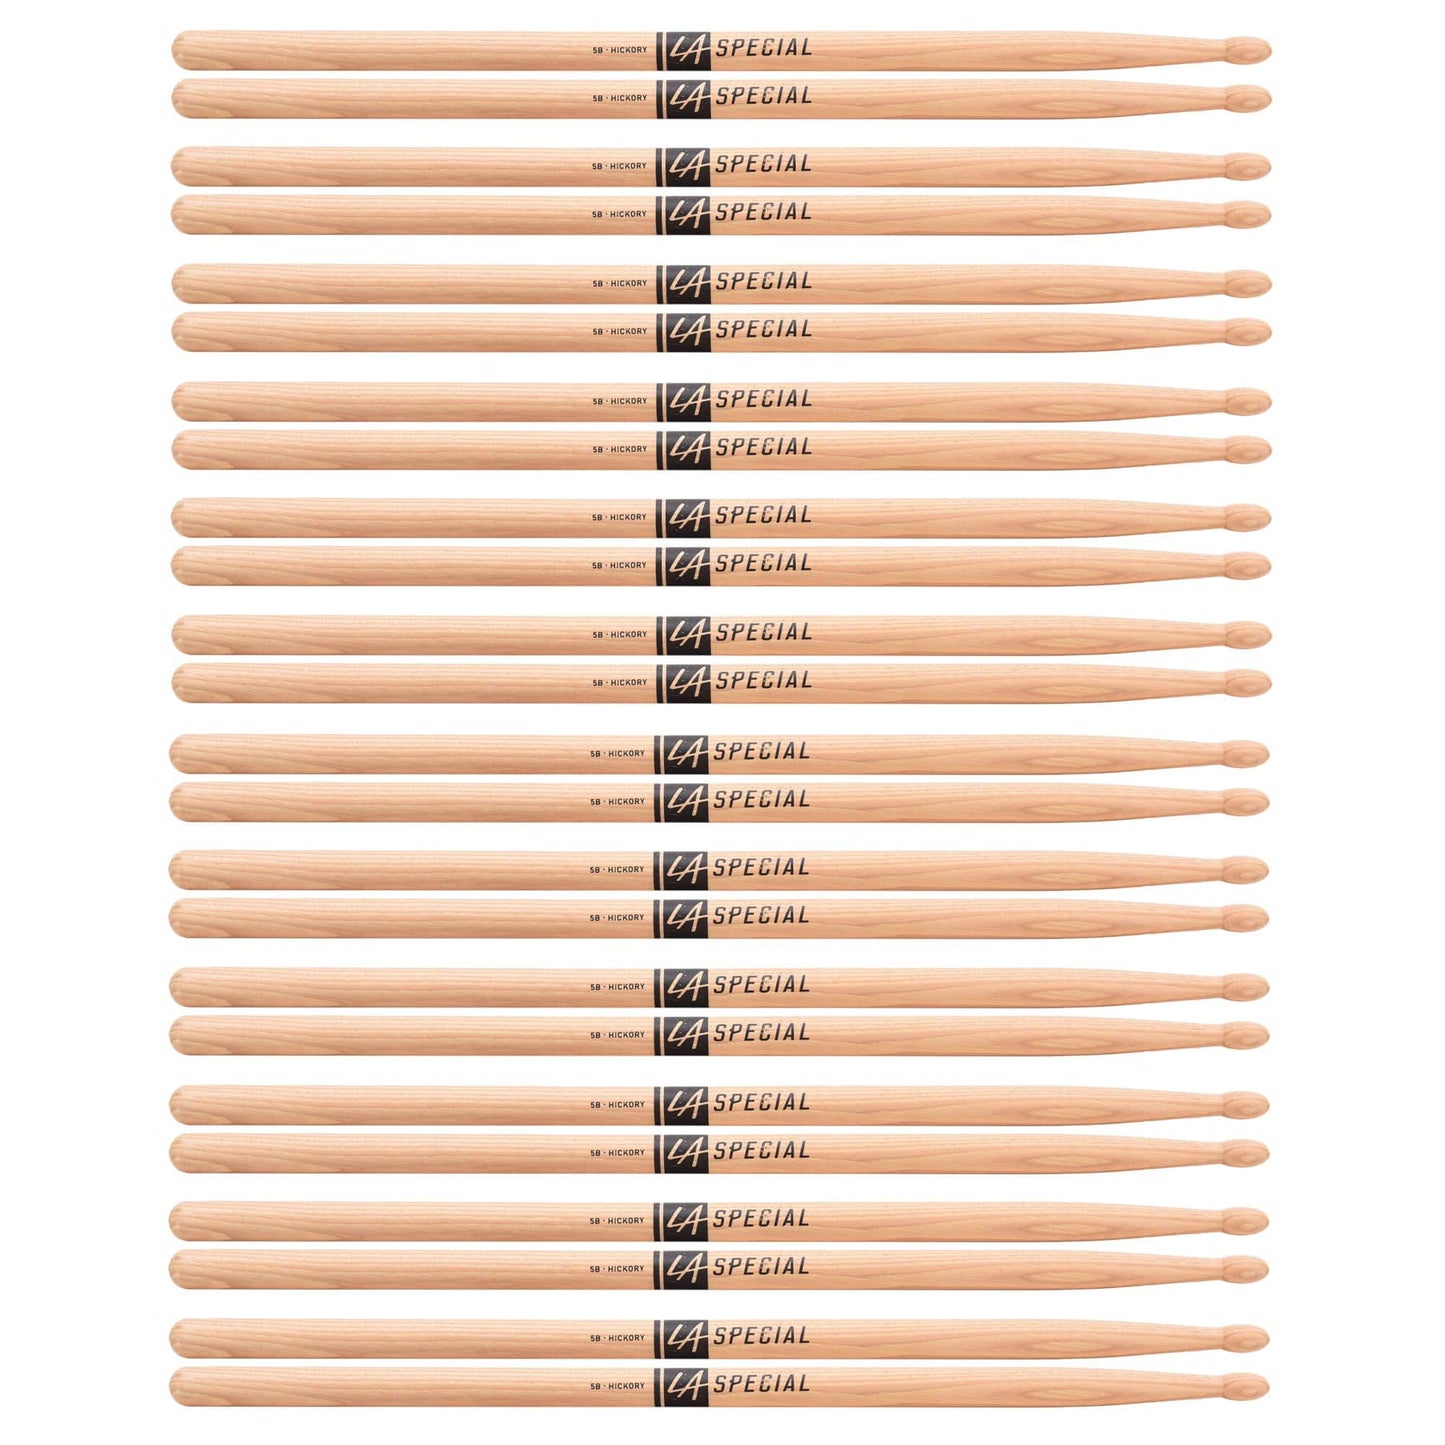 Promark LA Special 5B Wood Tip Drum Sticks (12 Pair Bundle) Drums and Percussion / Parts and Accessories / Drum Sticks and Mallets